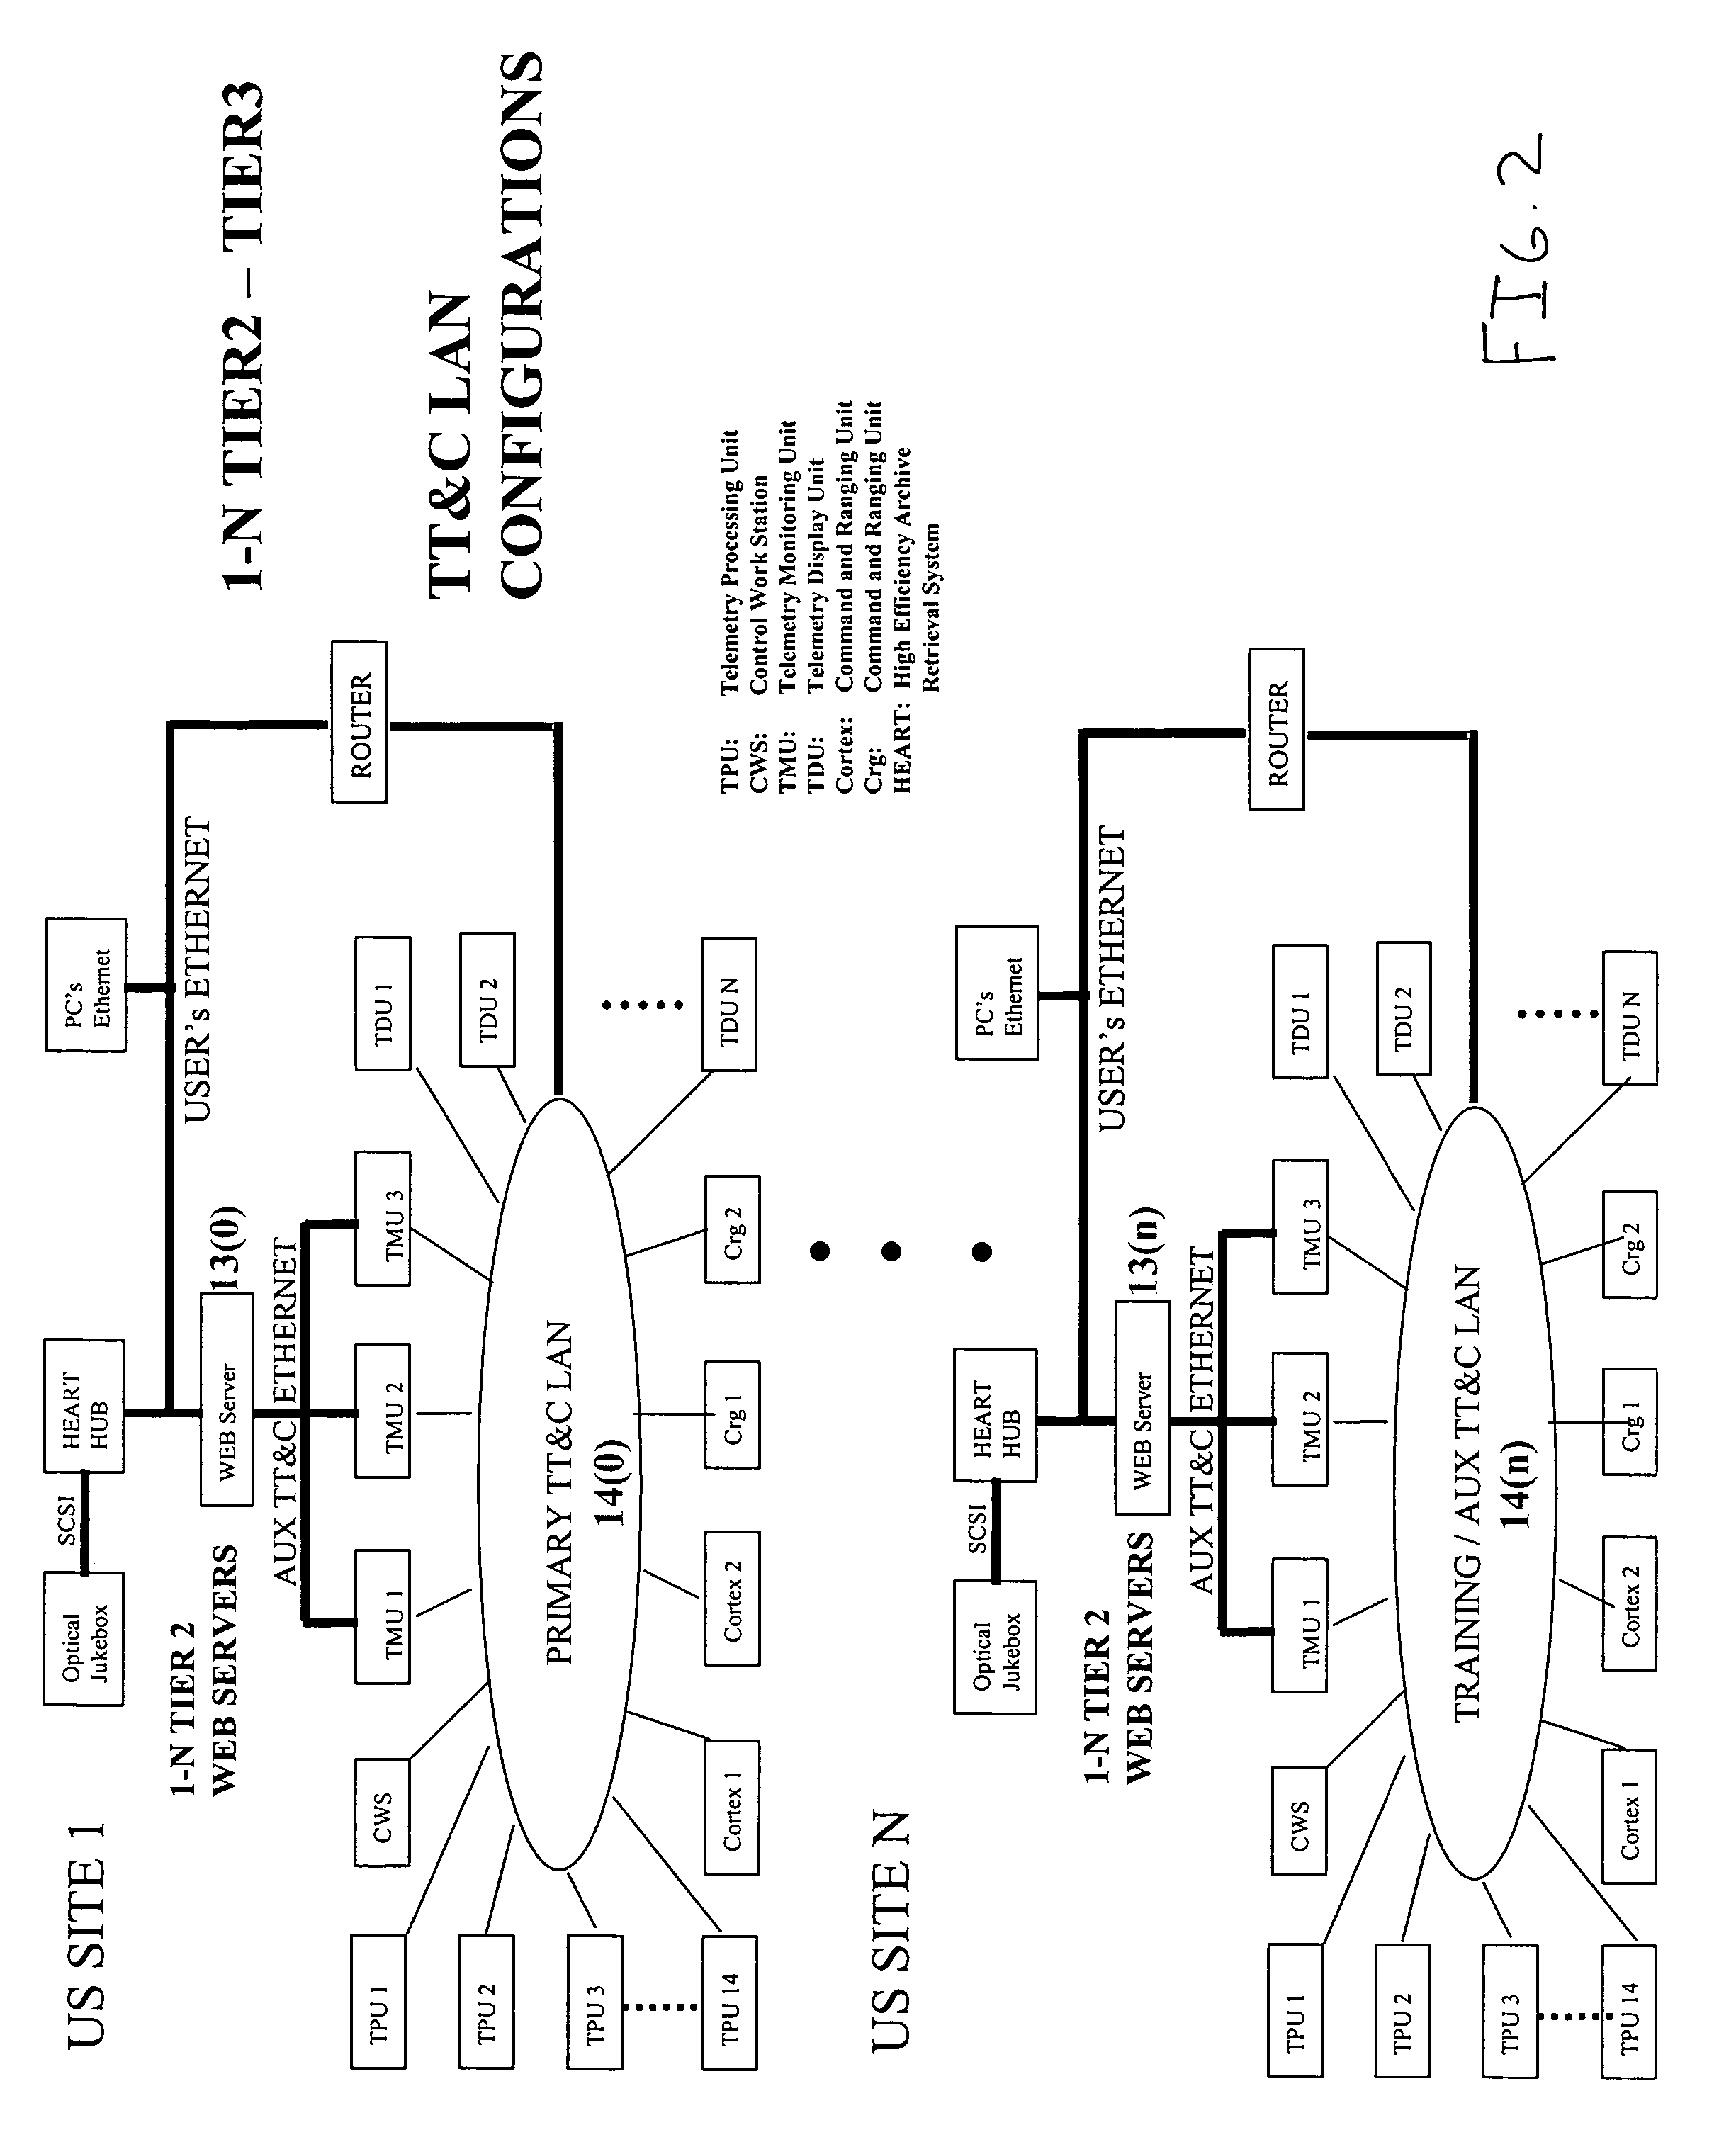 System and method of providing N-tiered enterprise/web-based management, procedure coordination, and control of a geosynchronous satellite fleet